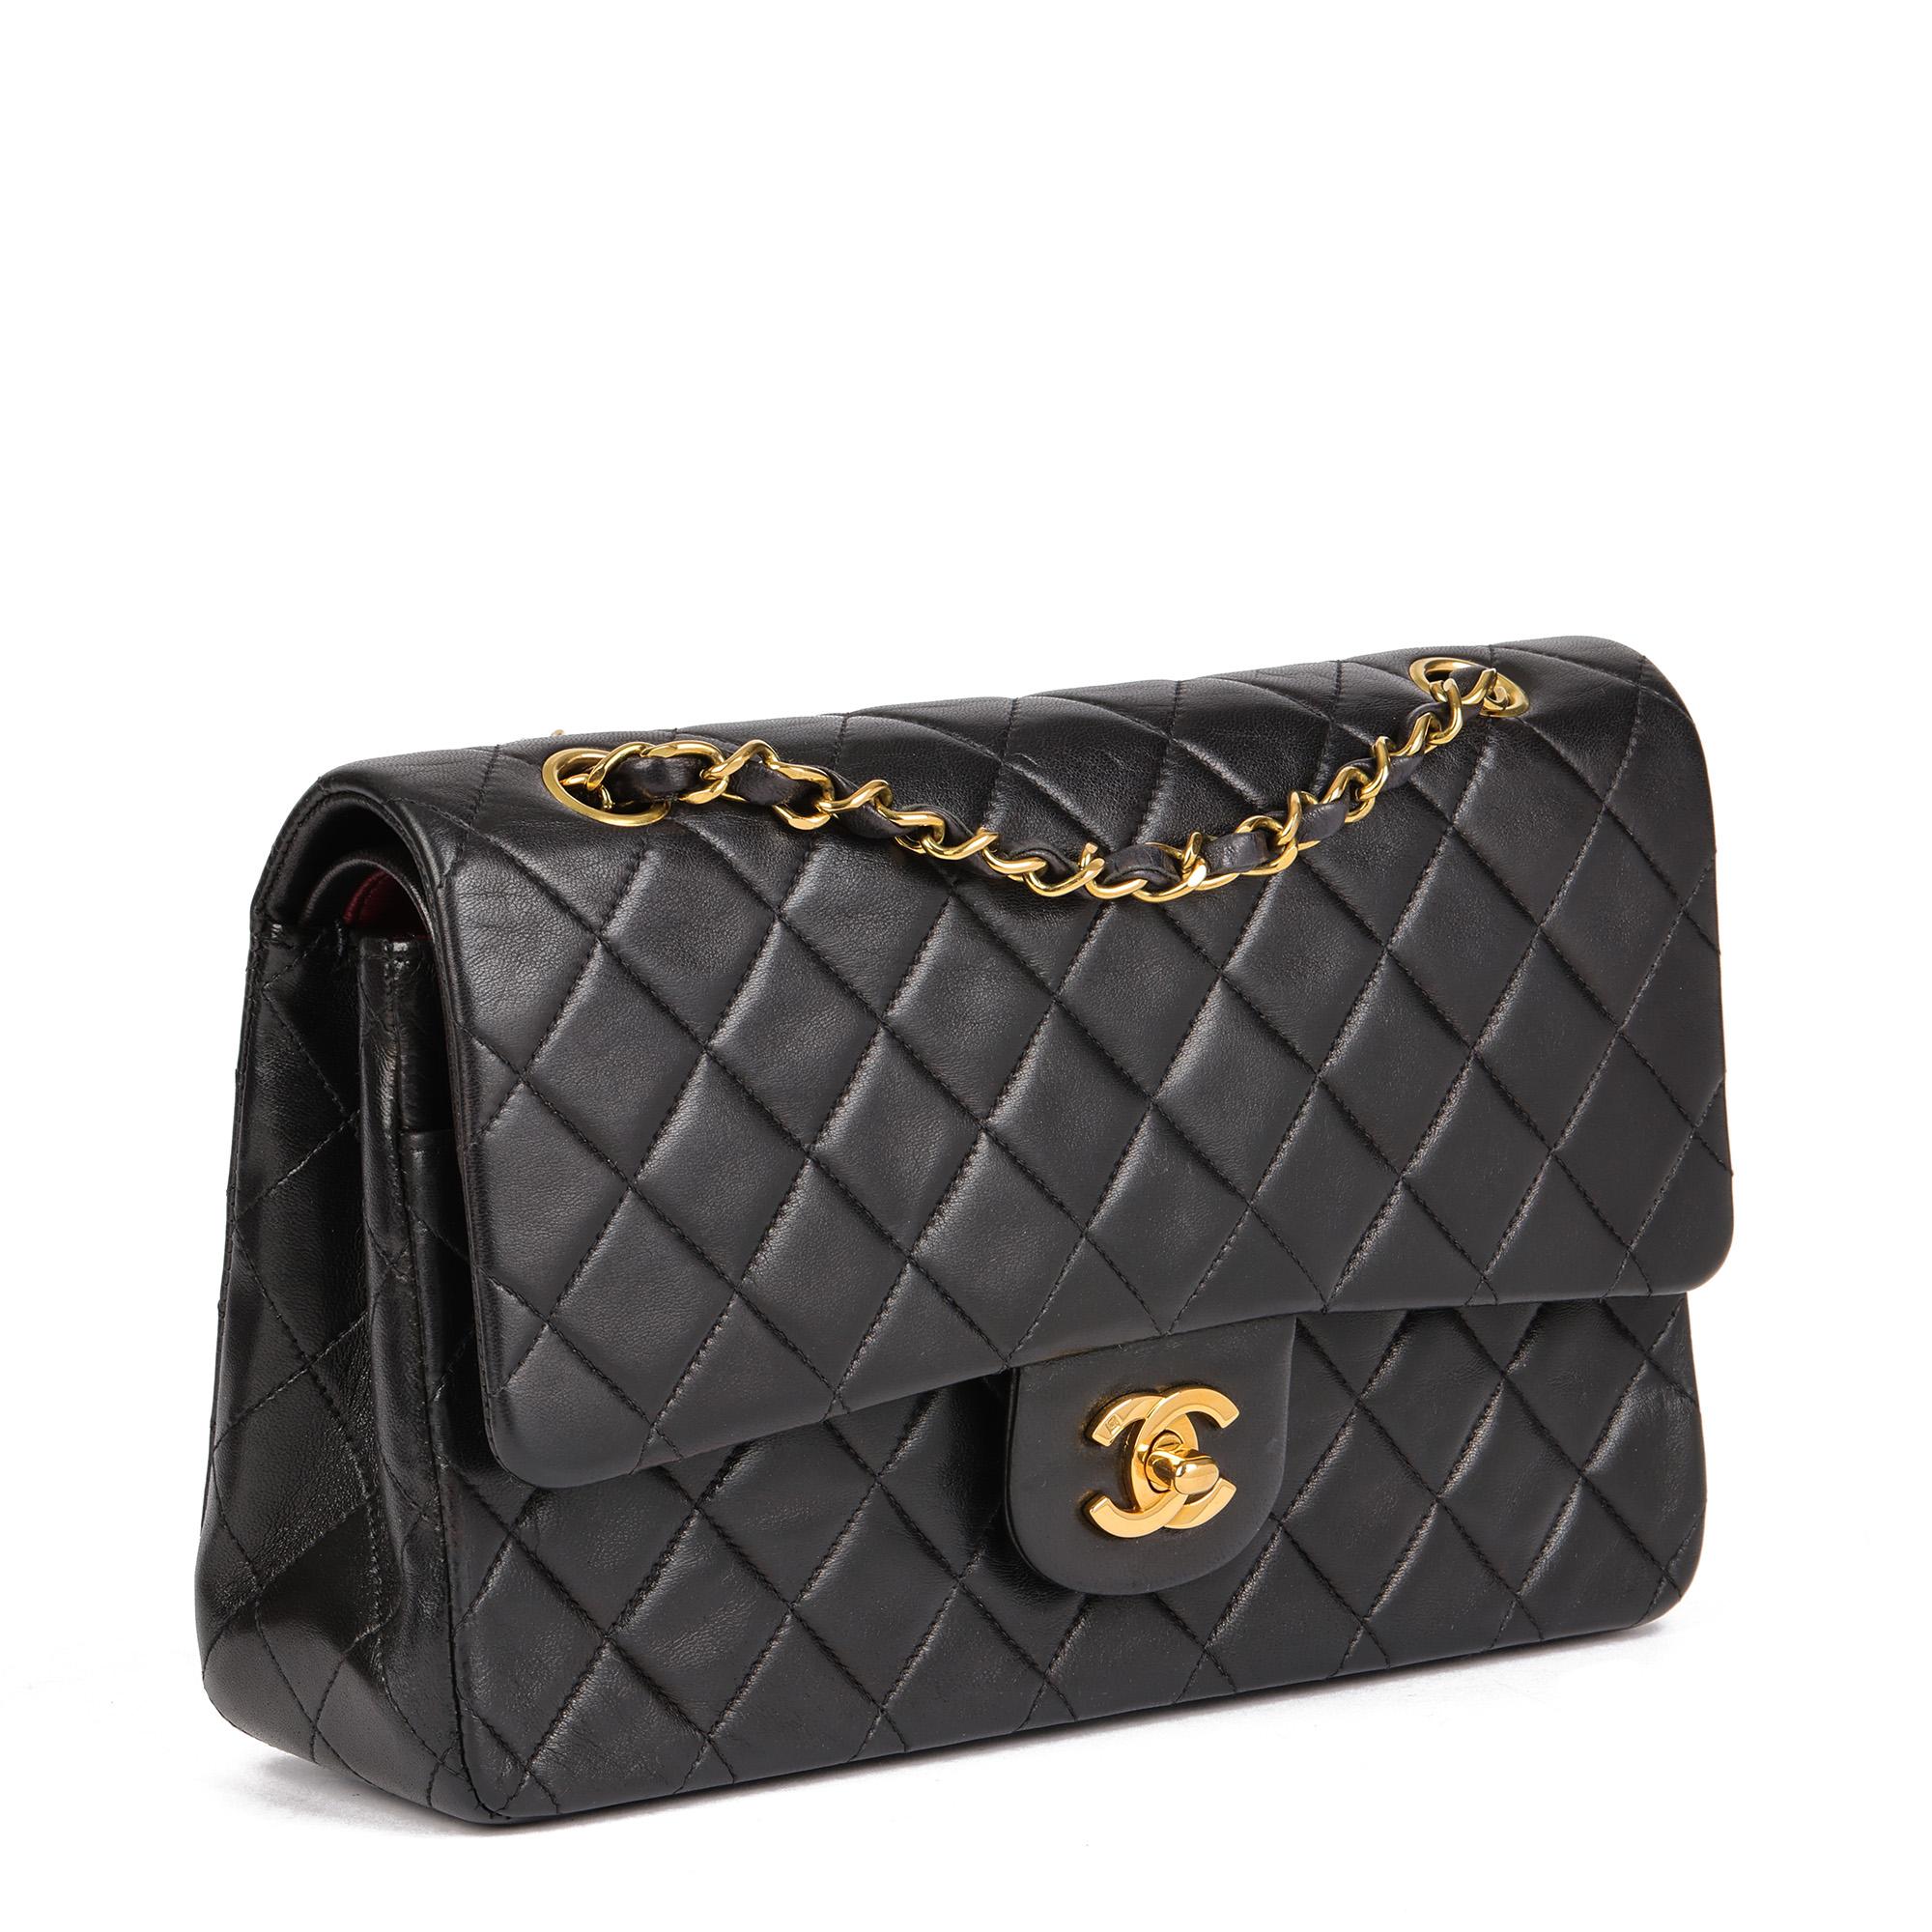 CHANEL
Black Quilted Lambskin Vintage Medium Classic Double Flap Bag 

Serial Number: 2855380
Age (Circa): 1993
Accompanied By: Chanel Dust Bag, Authenticity Card
Authenticity Details: Authenticity Card, Serial Sticker (Made in France)
Gender: